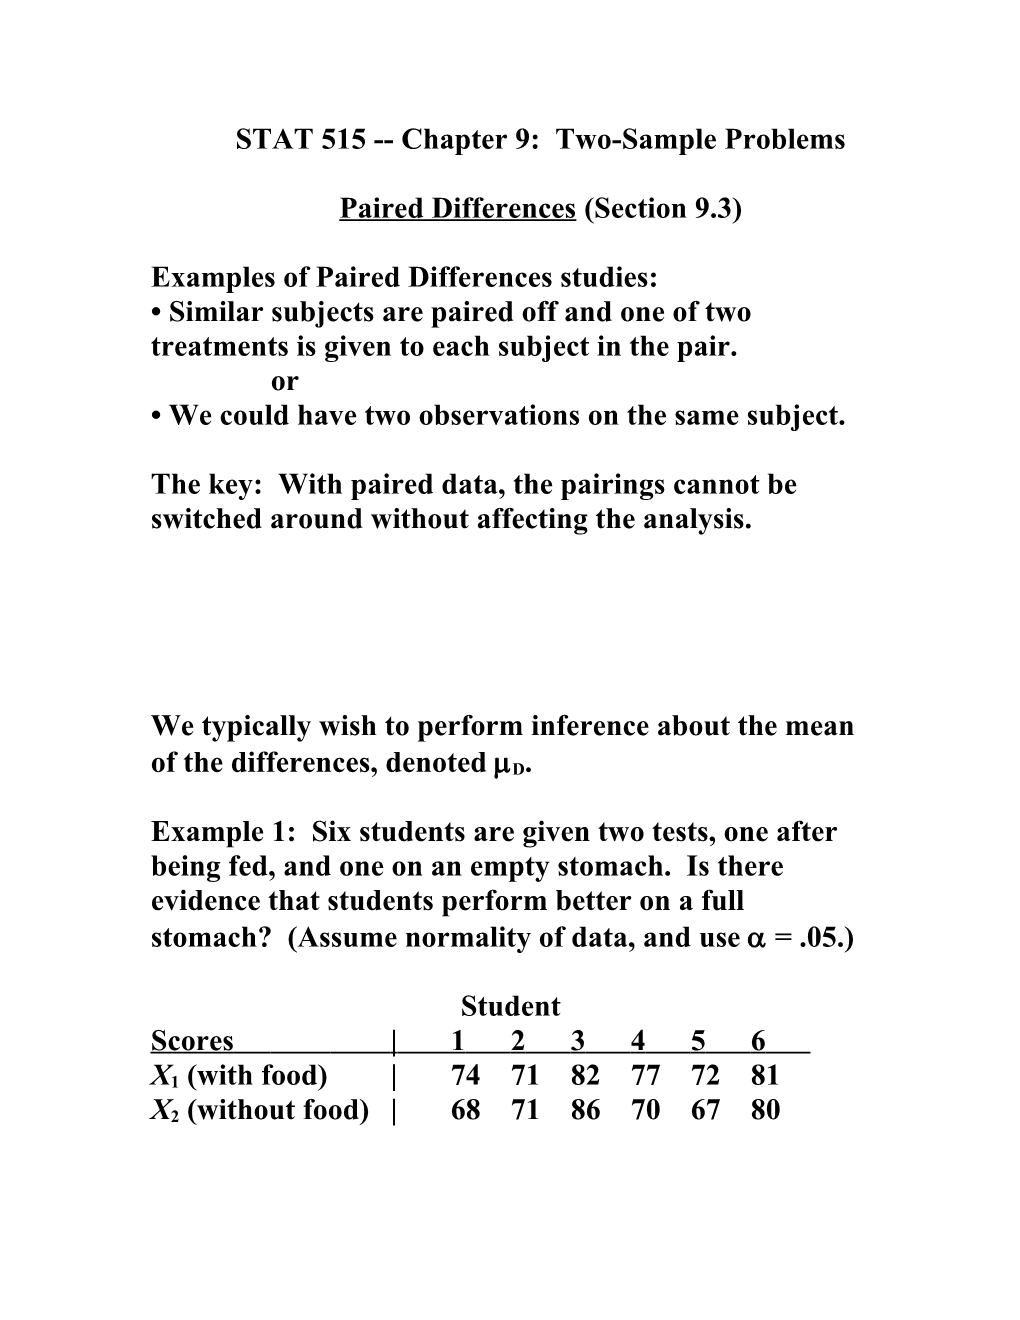 STAT 515 Chapter 8: Hypothesis Tests